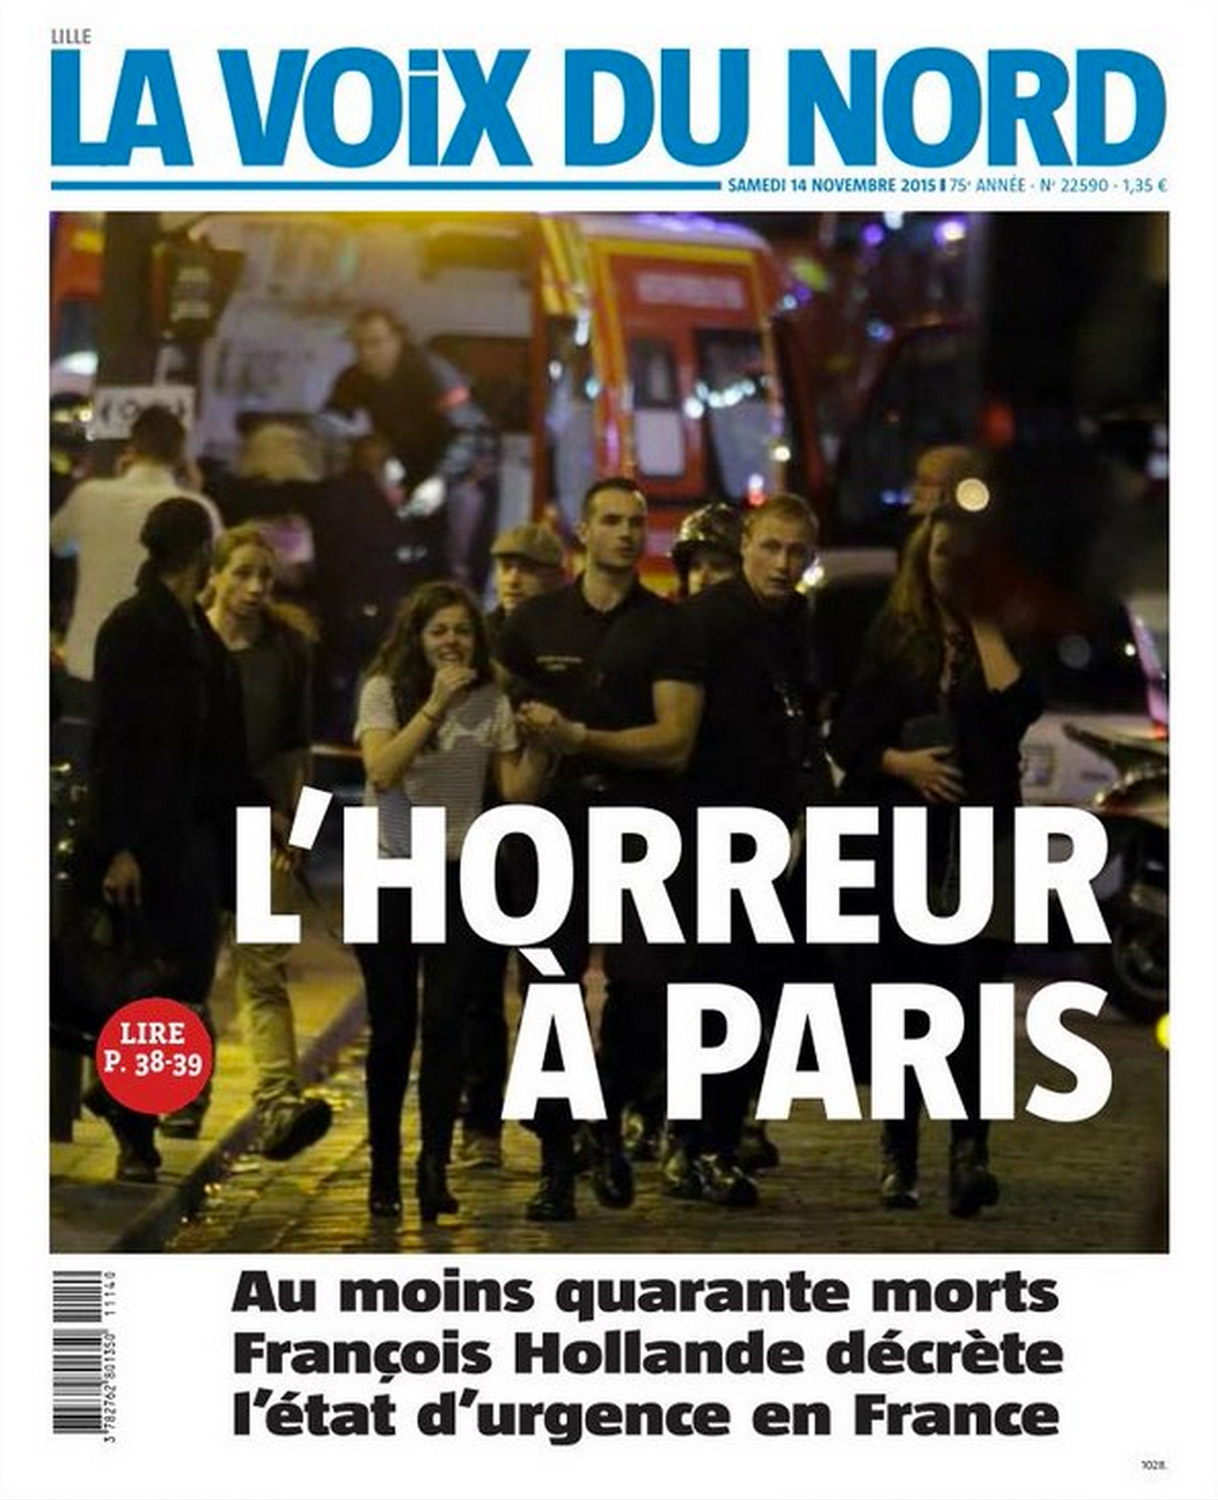 The front page of La Voix Du Nord after the Paris attacks on Nov. 13, 2015